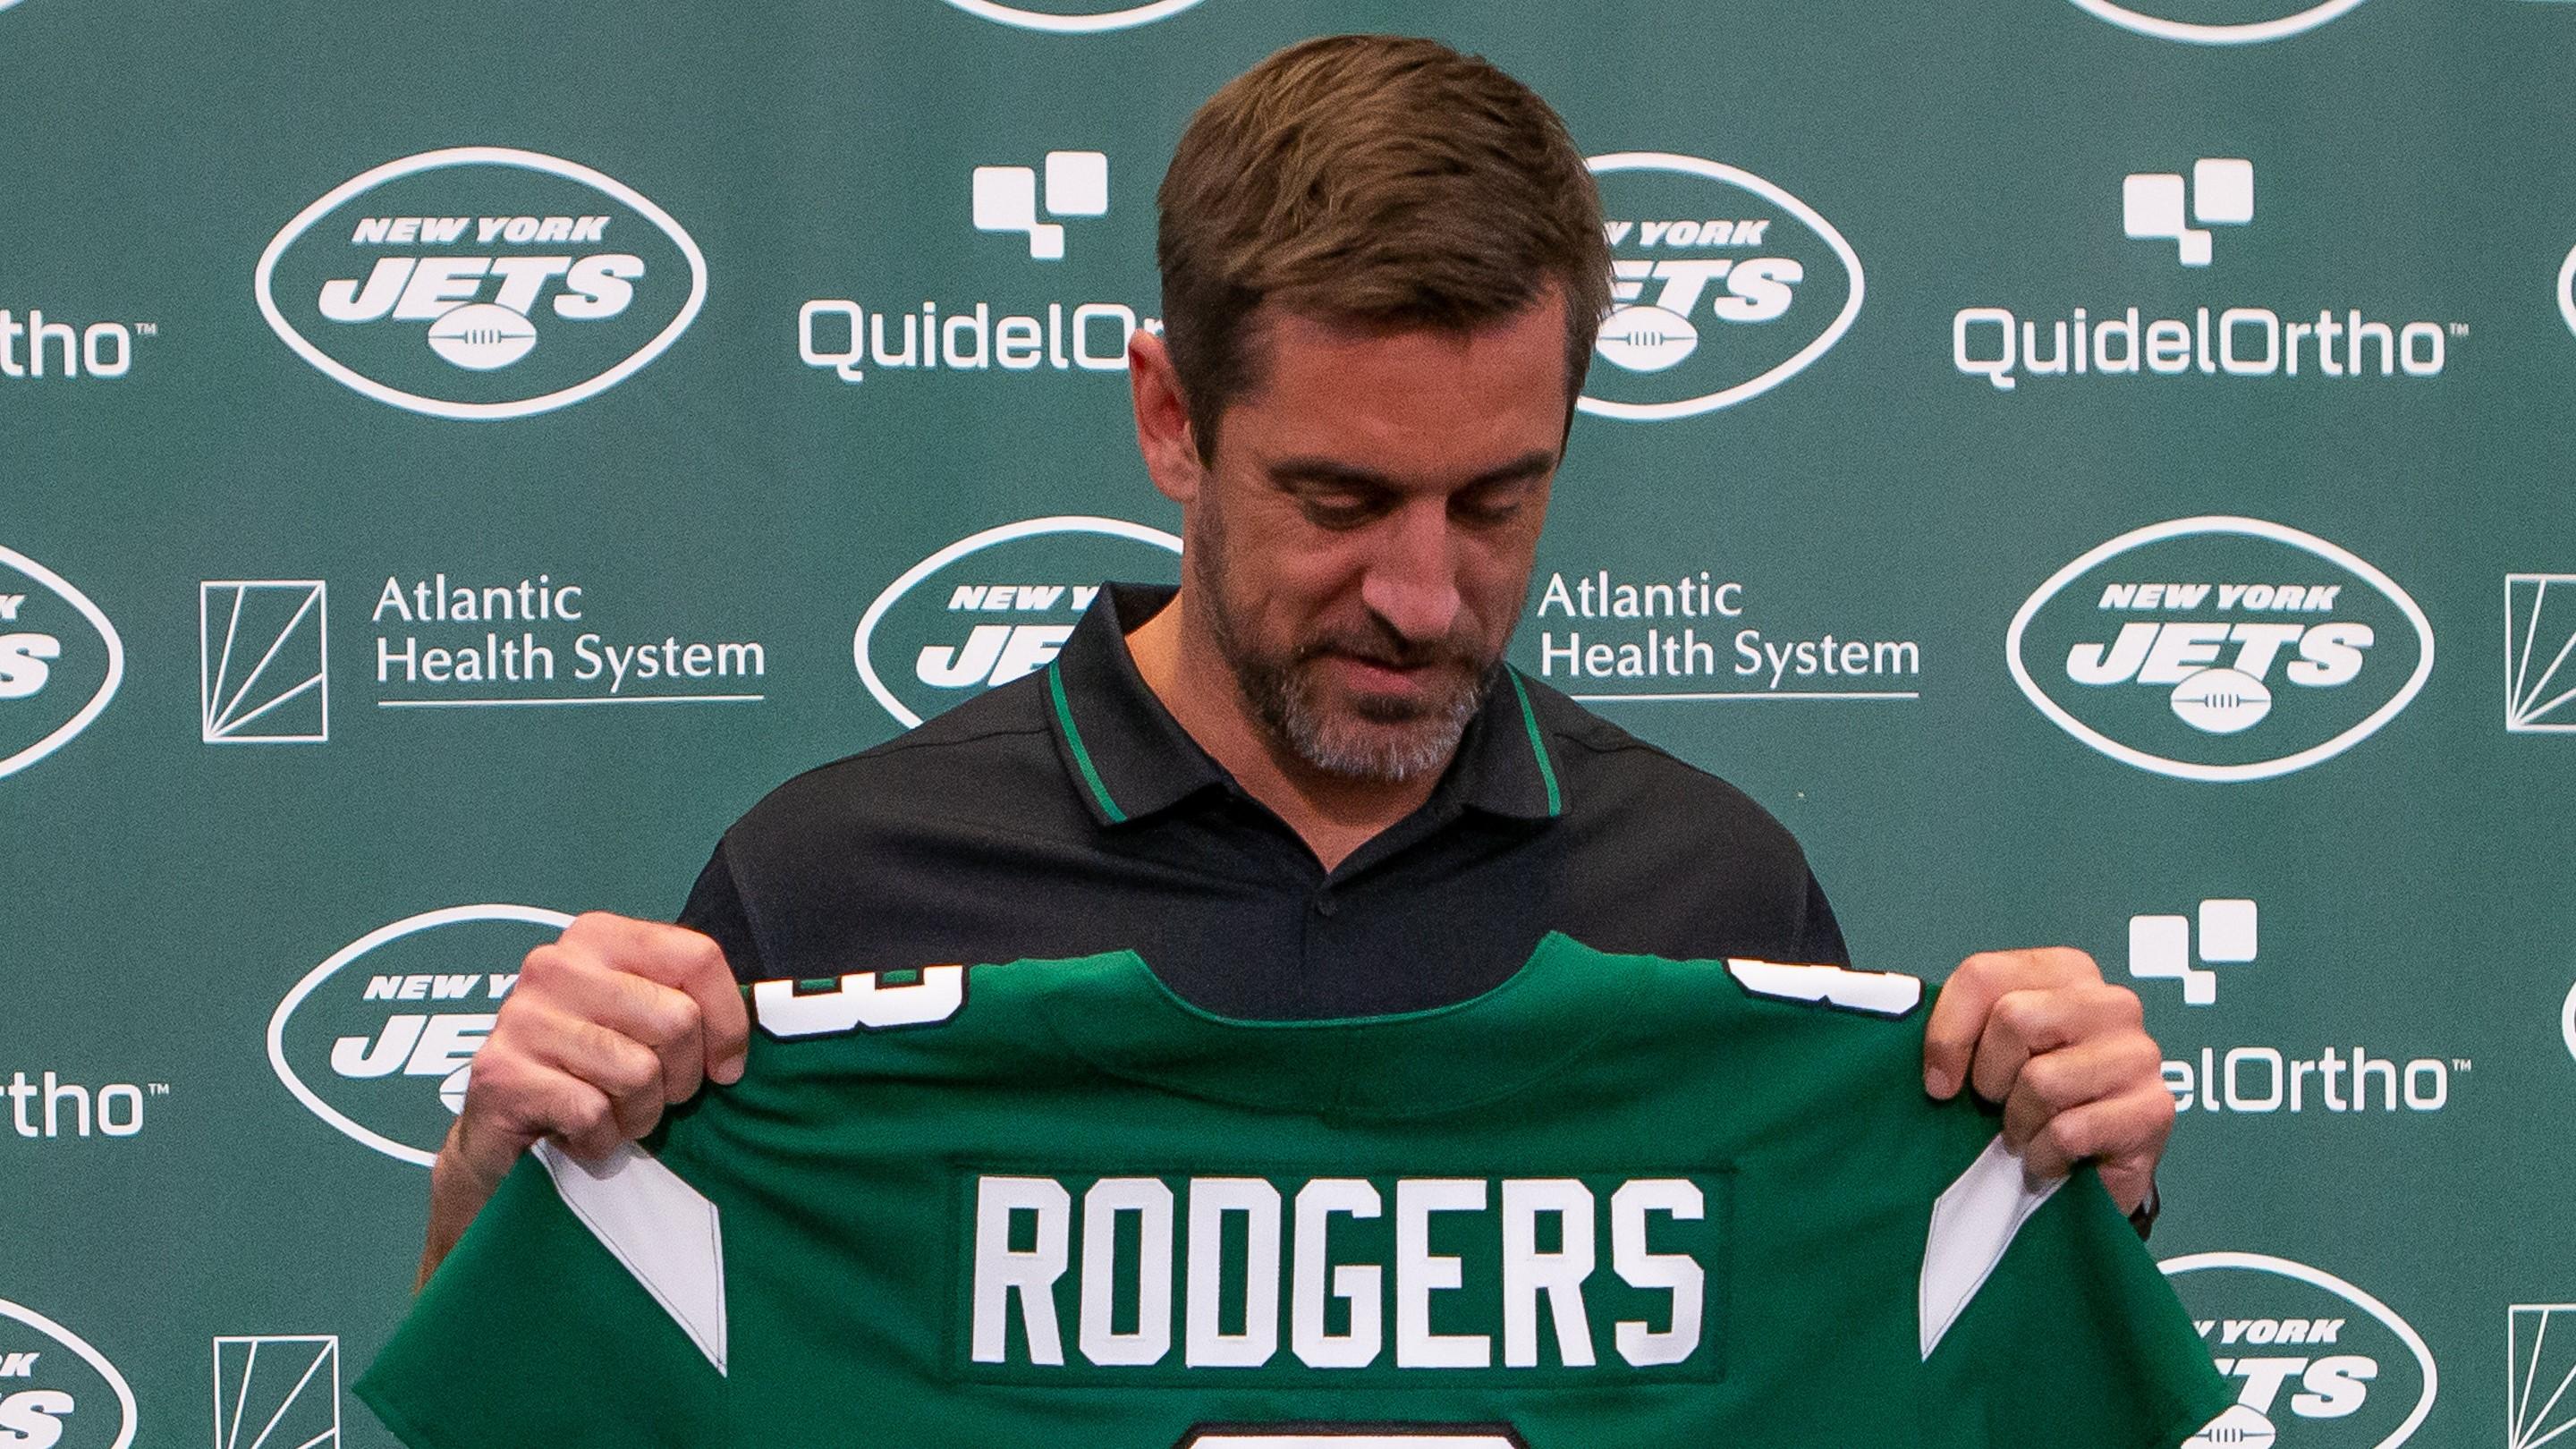 Aaron Rodgers looks down at his No. 8 Jets jersey during his introductory news conference. / Tom Horak-USA TODAY Sports